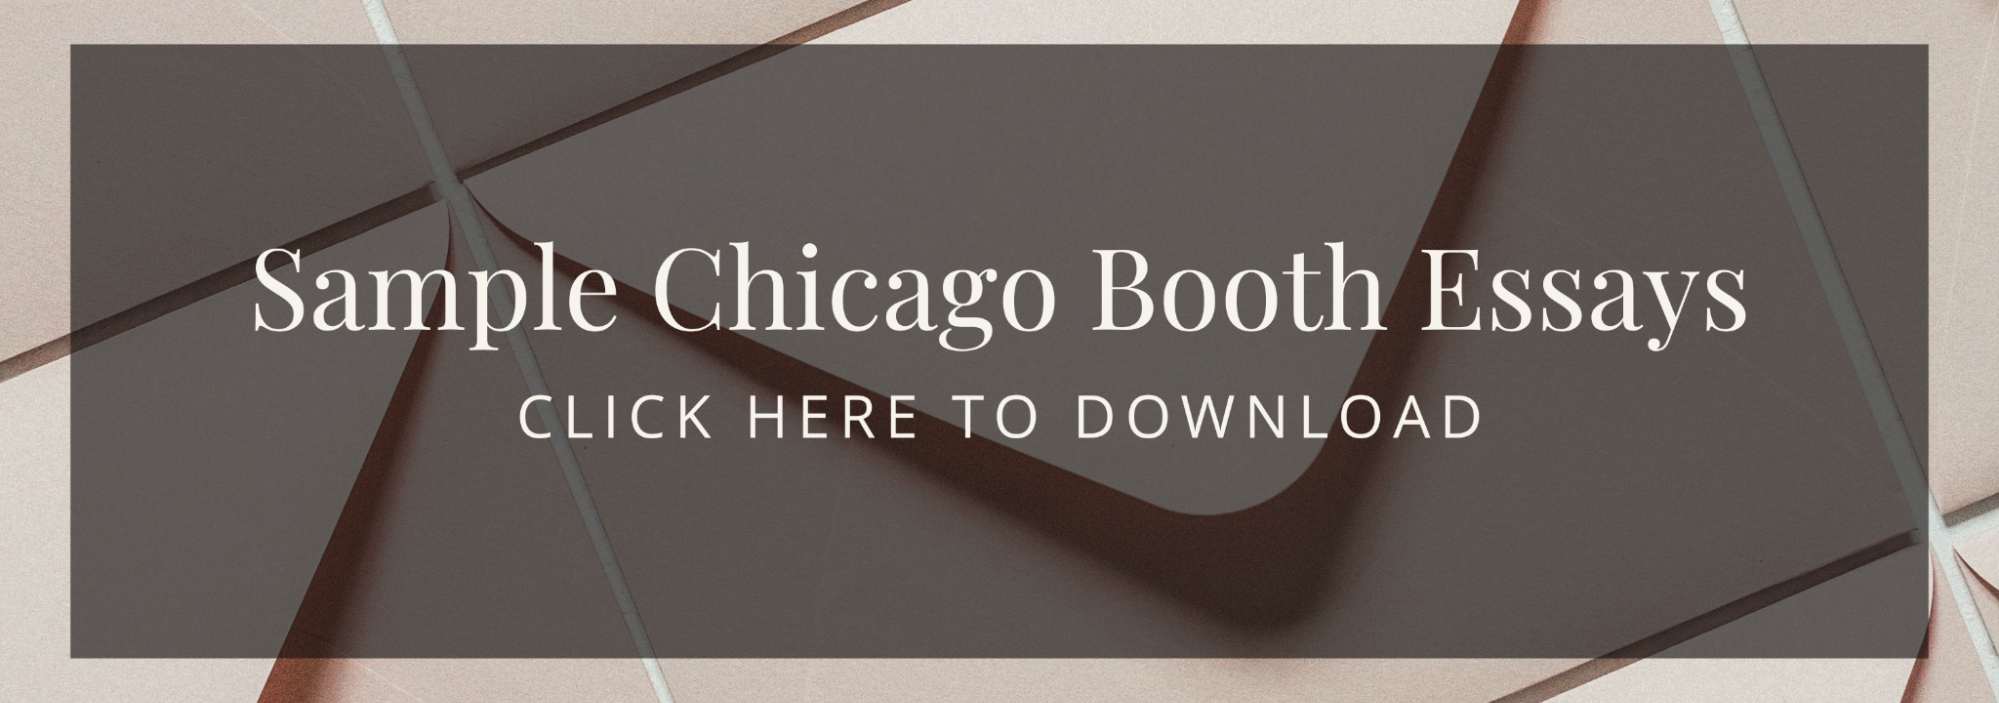 chicago booth mba essay sample